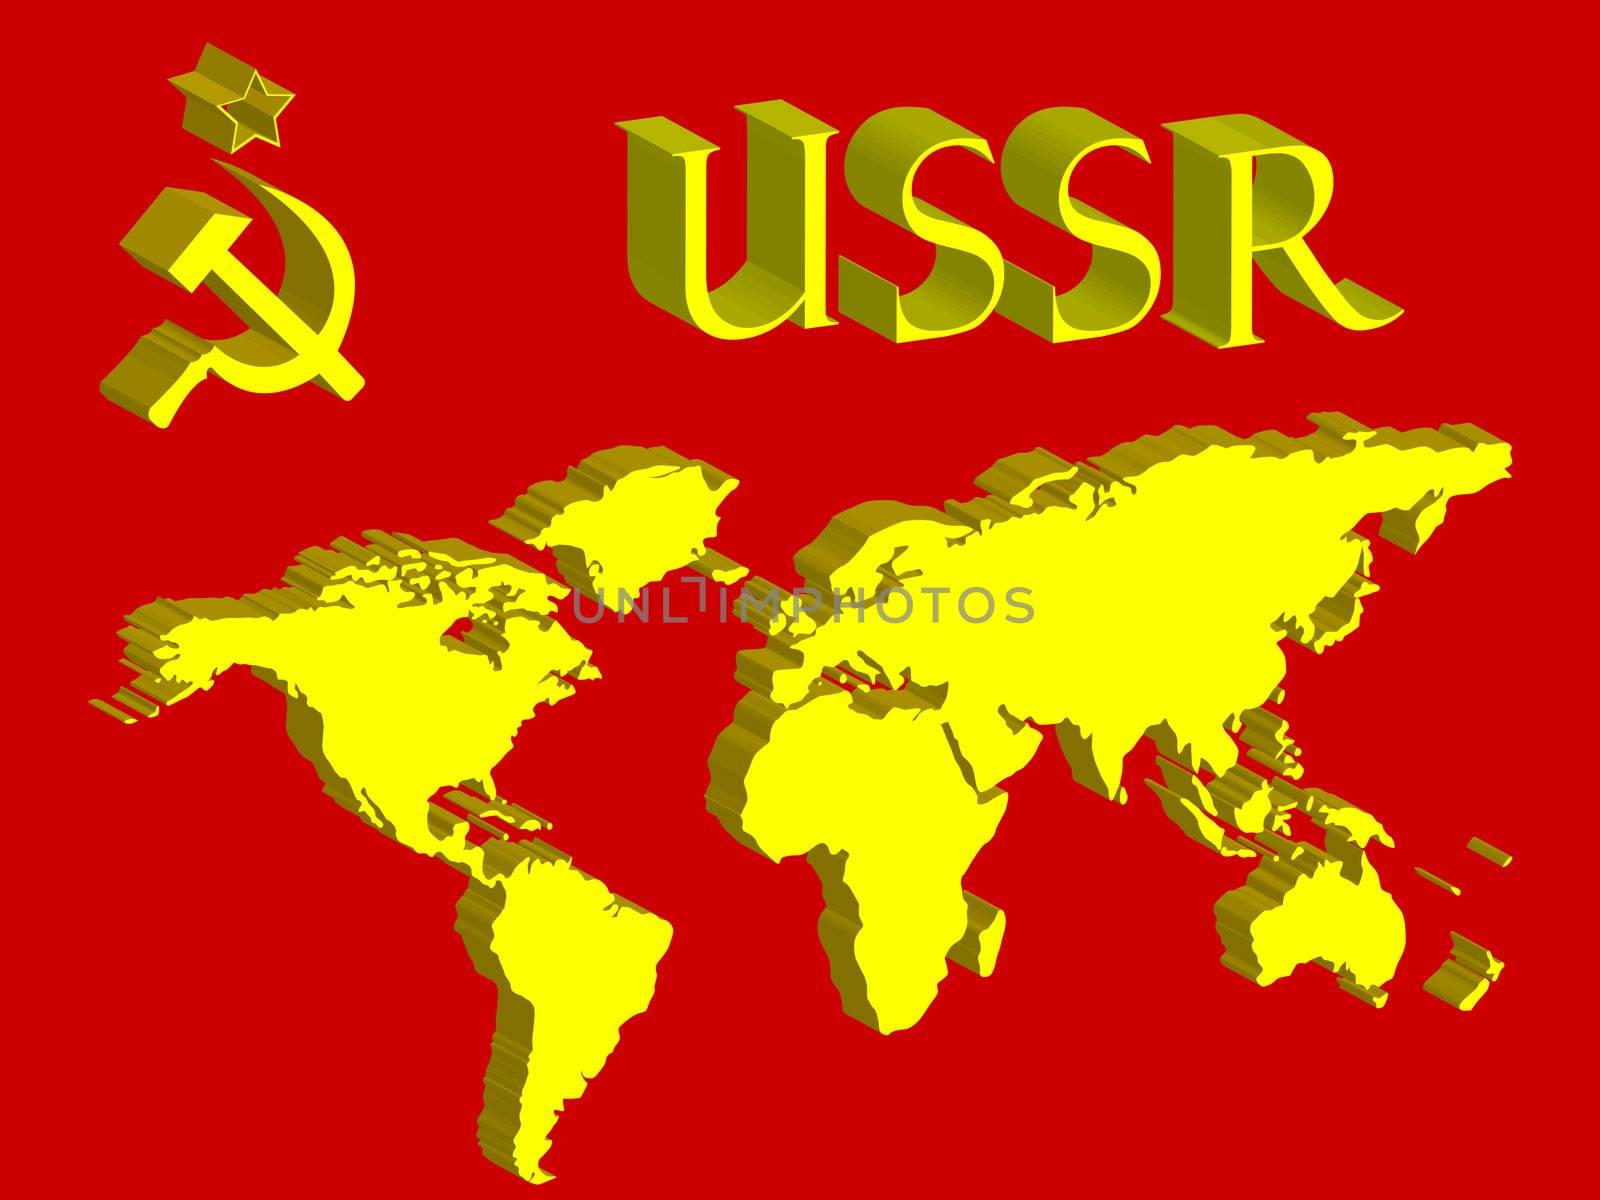 ussr symbol and world map by robertosch